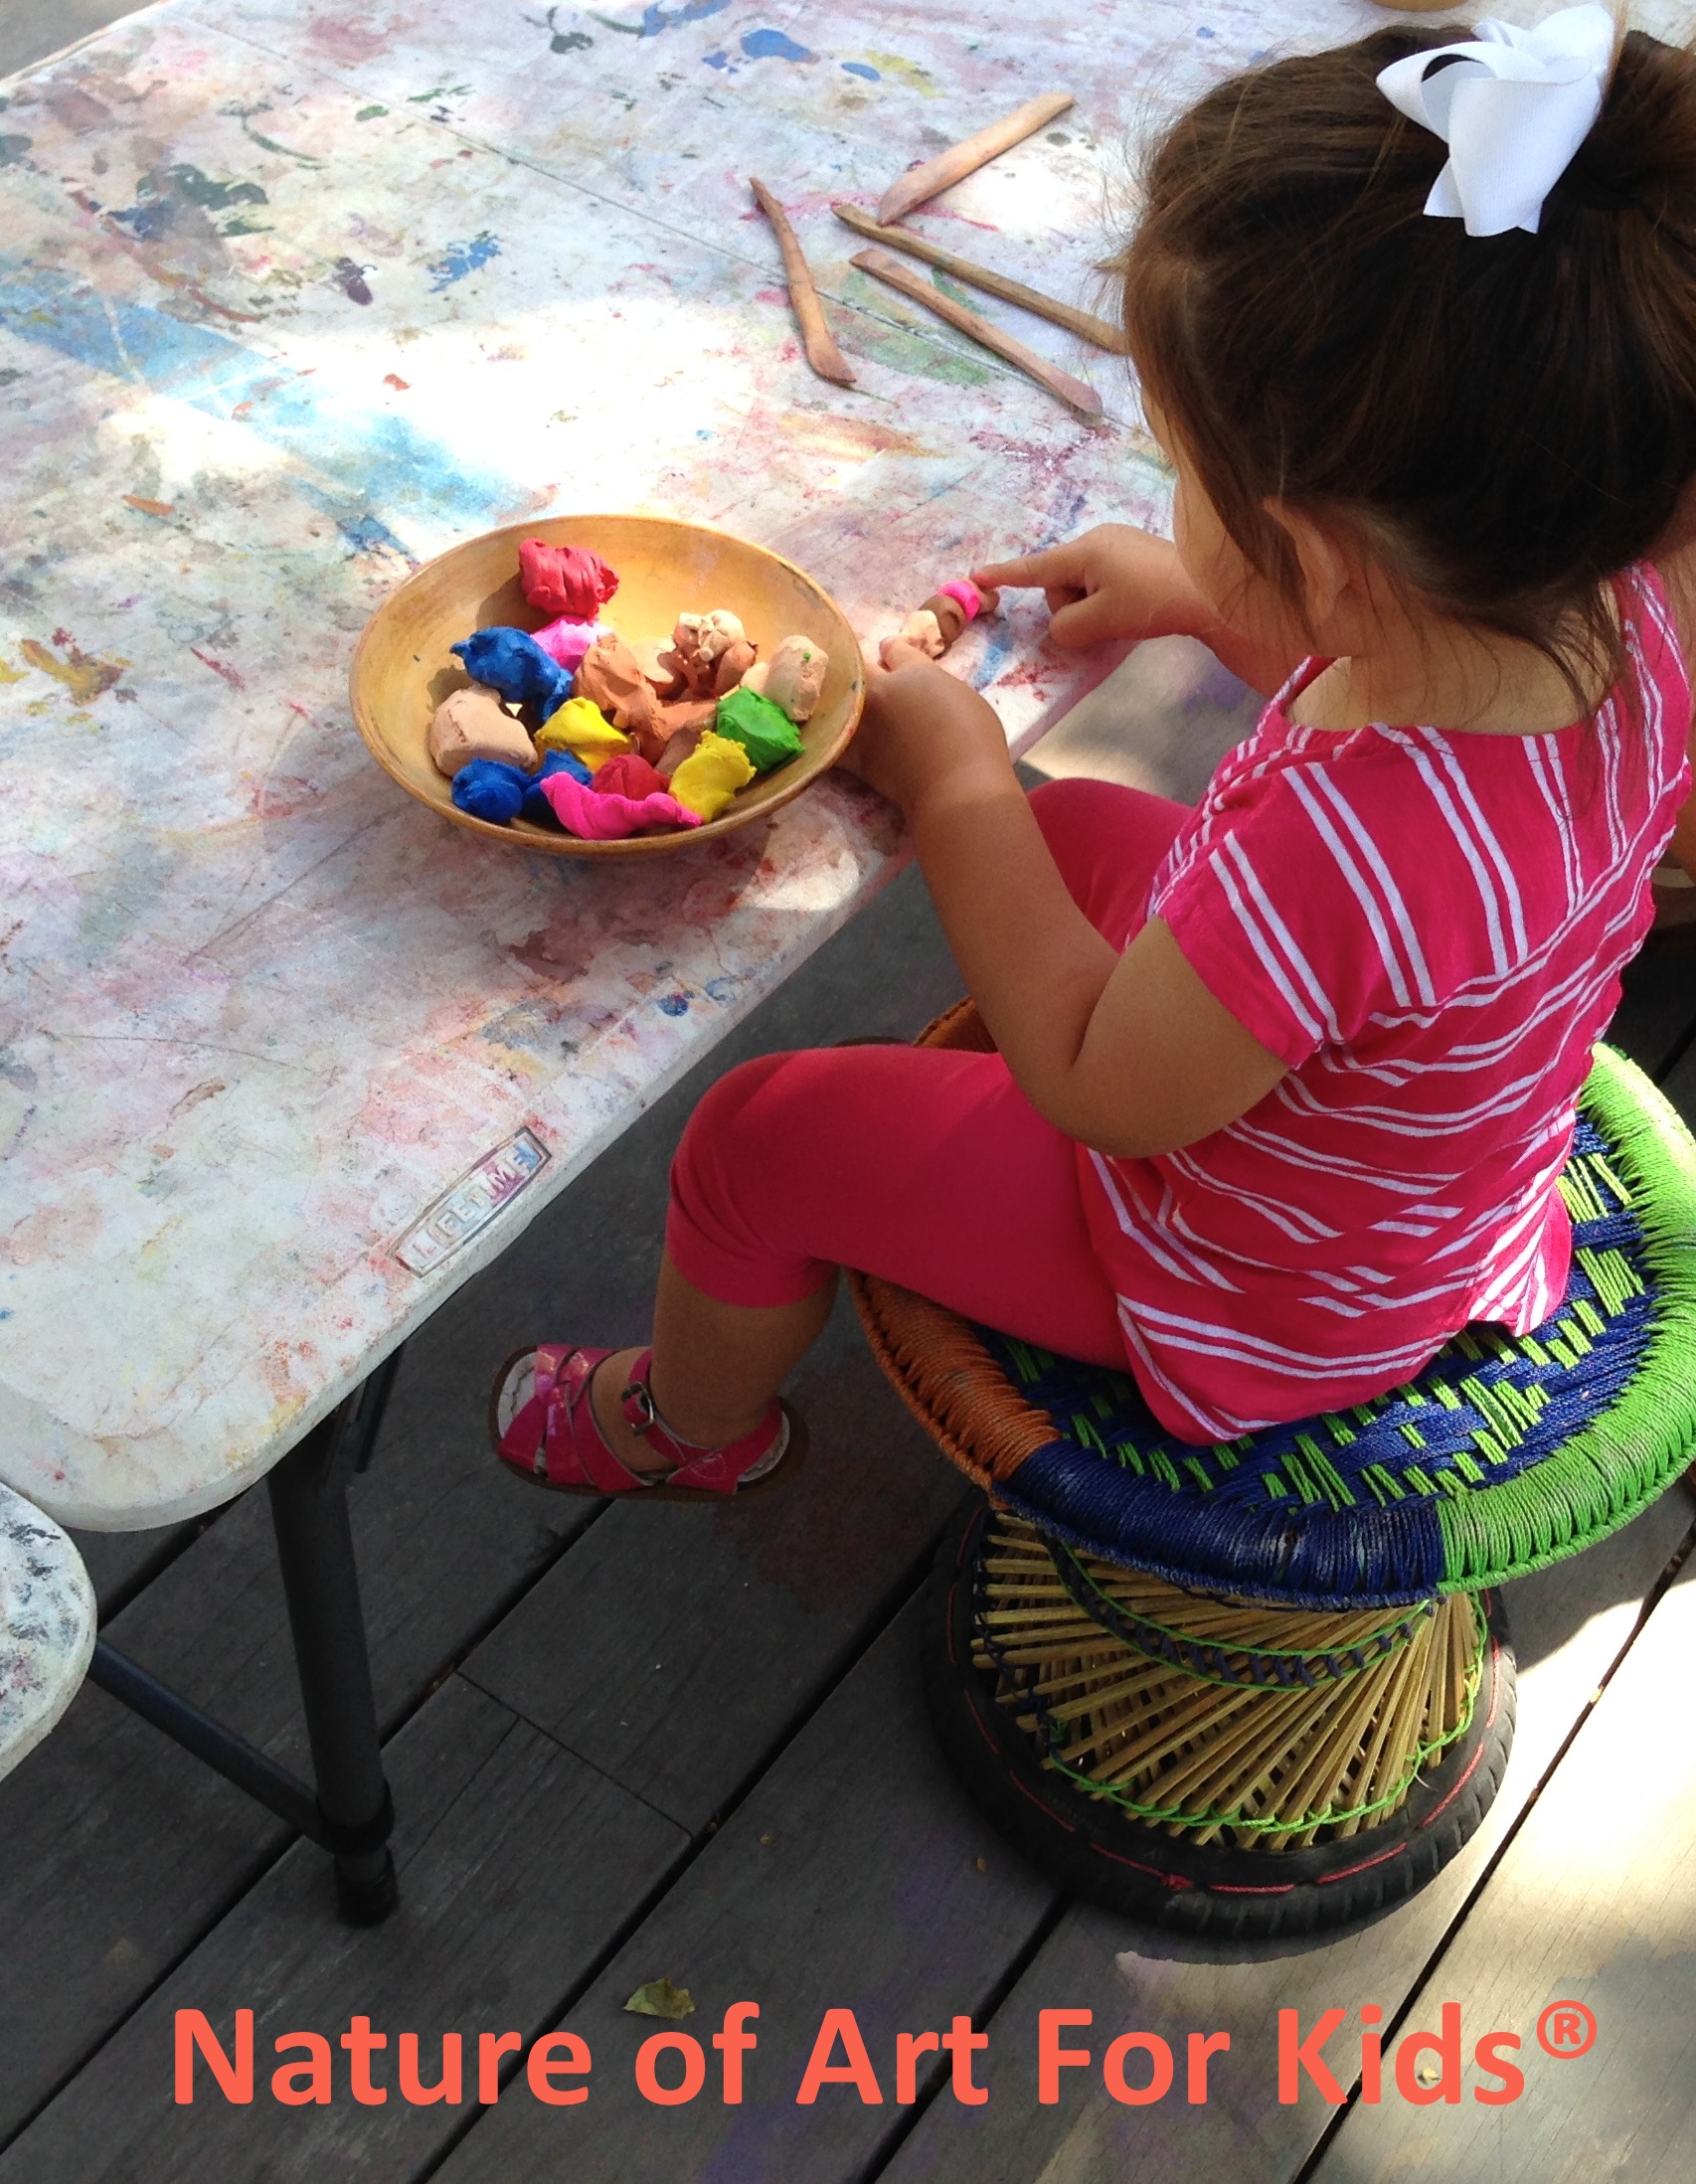 Playing with clay can relieve stress for kids - Art making